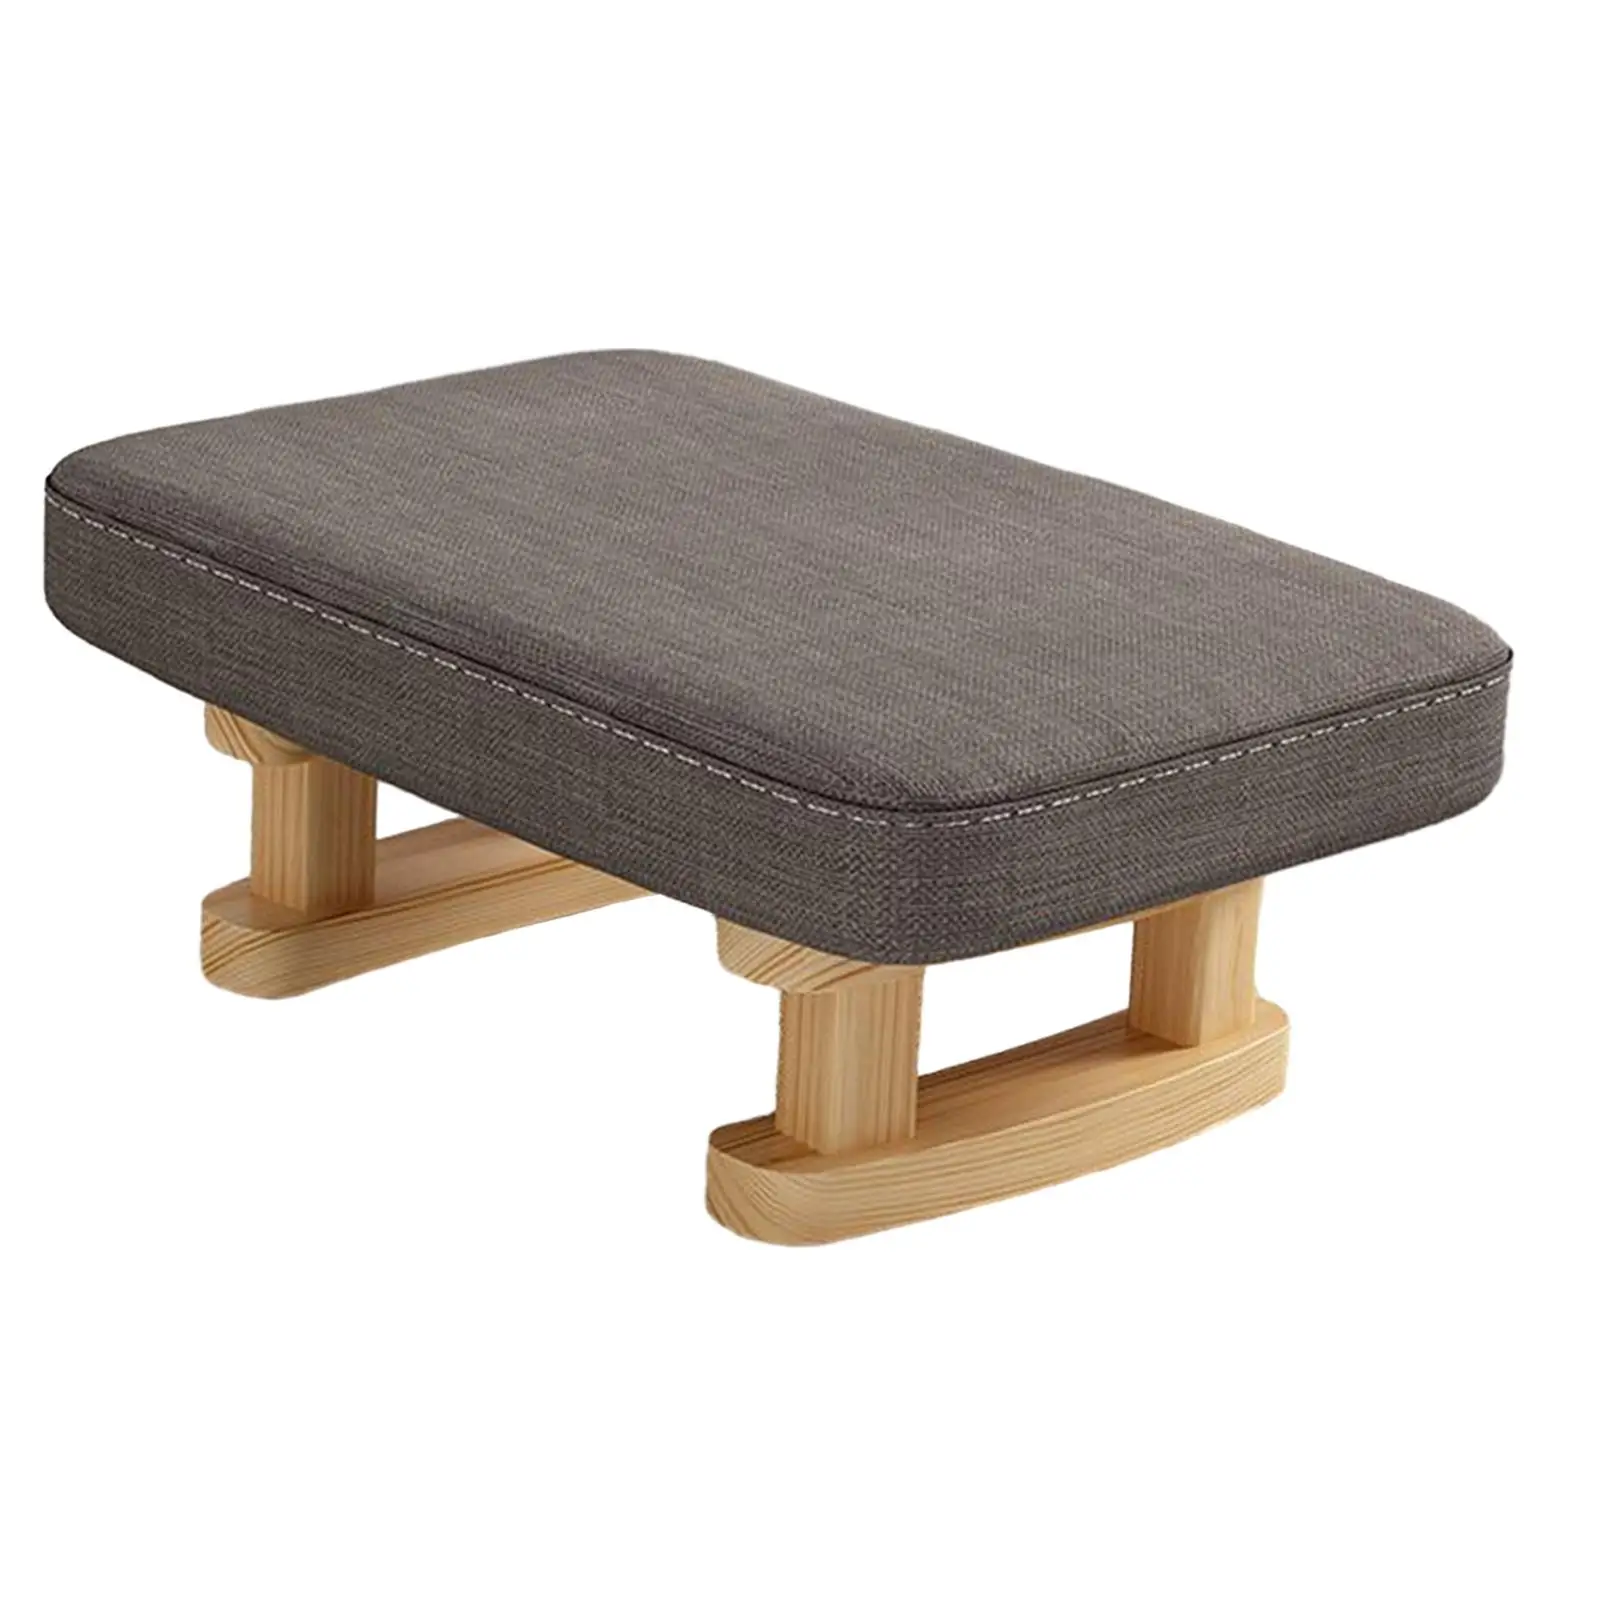 Padded Foot Stool Bench 41x30x18cm/16.14x11.81x7.09inch Rectangle Step Stool for Porch Bedroom Living Guest Room Playroom